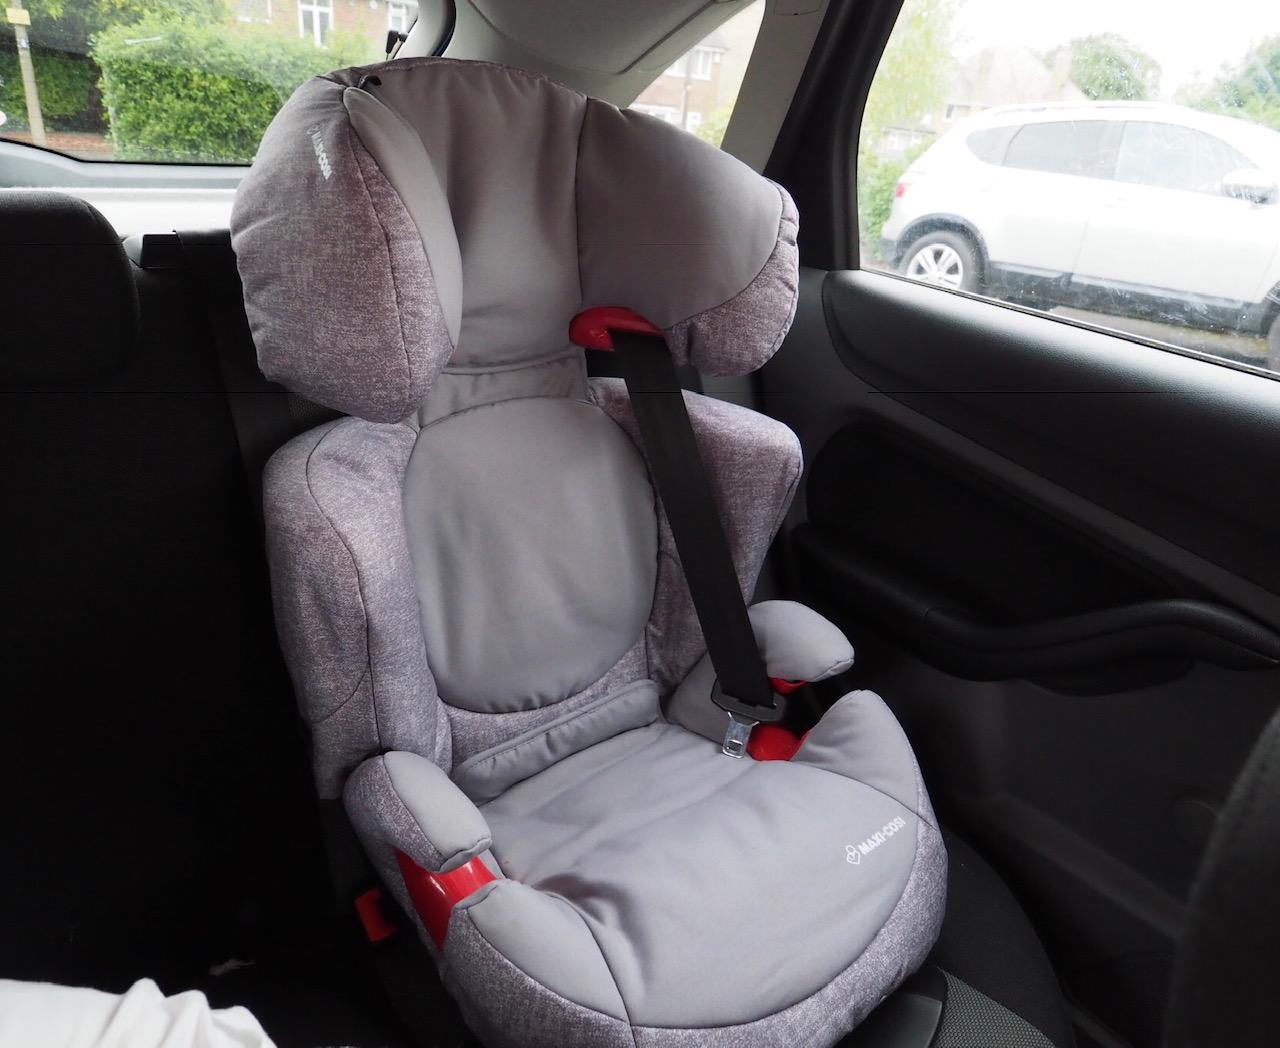 the maxi-cosi Rodi Air Protect car seat in nomad grey installed in car empty